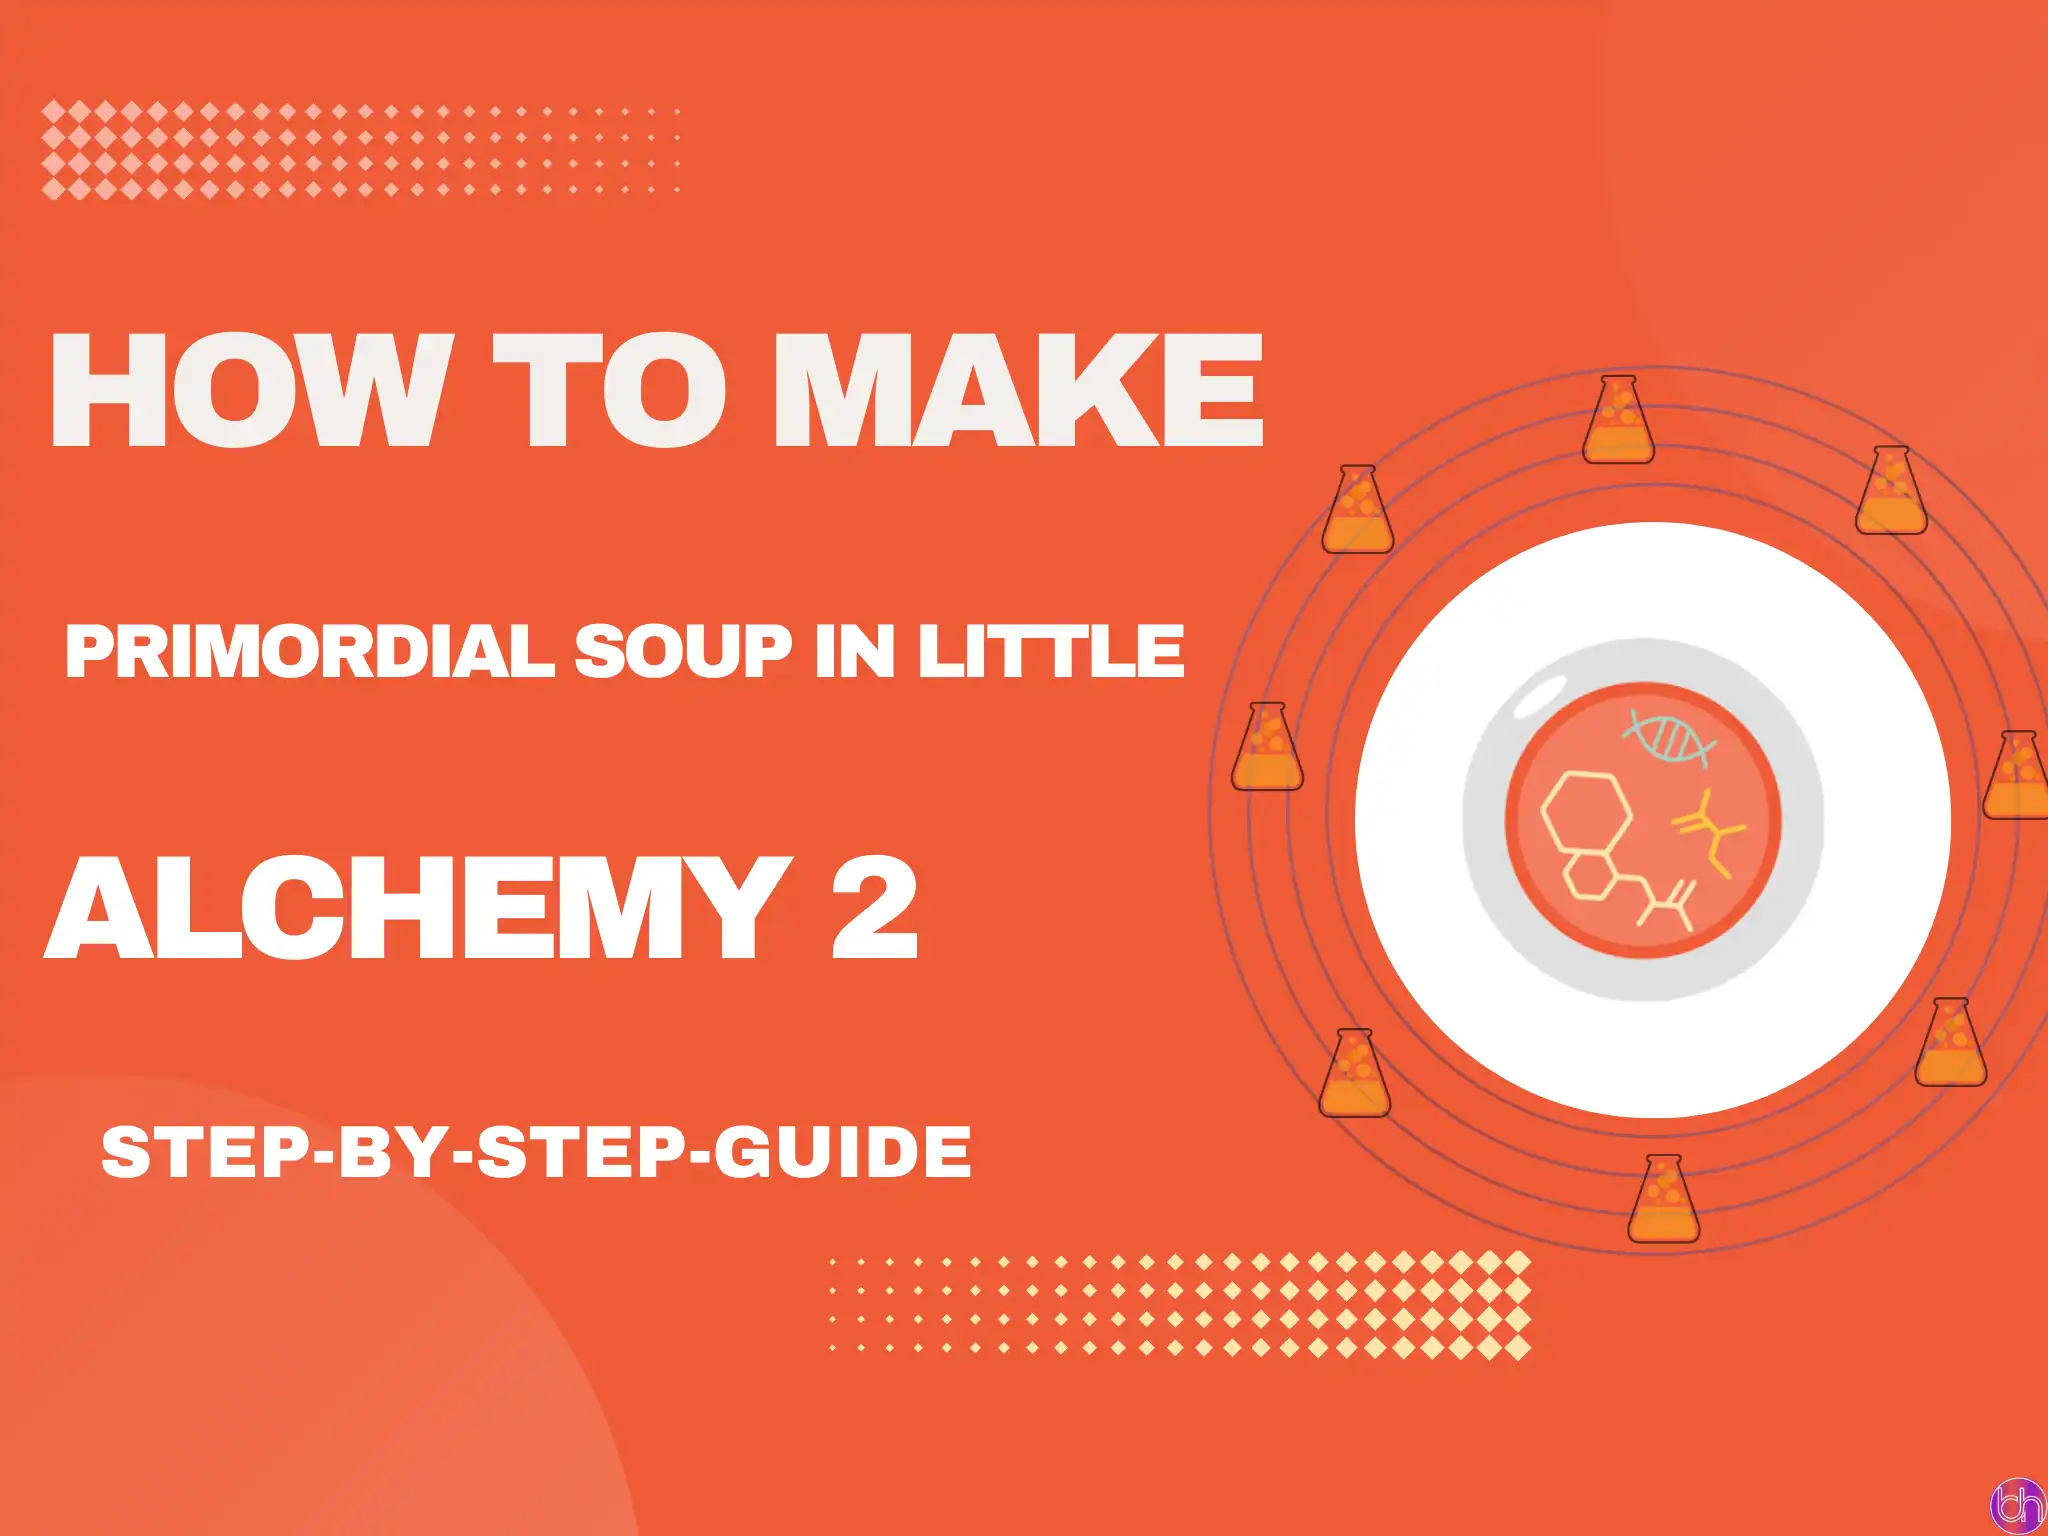 How to make Primordial Soup in Little Alchemy 2